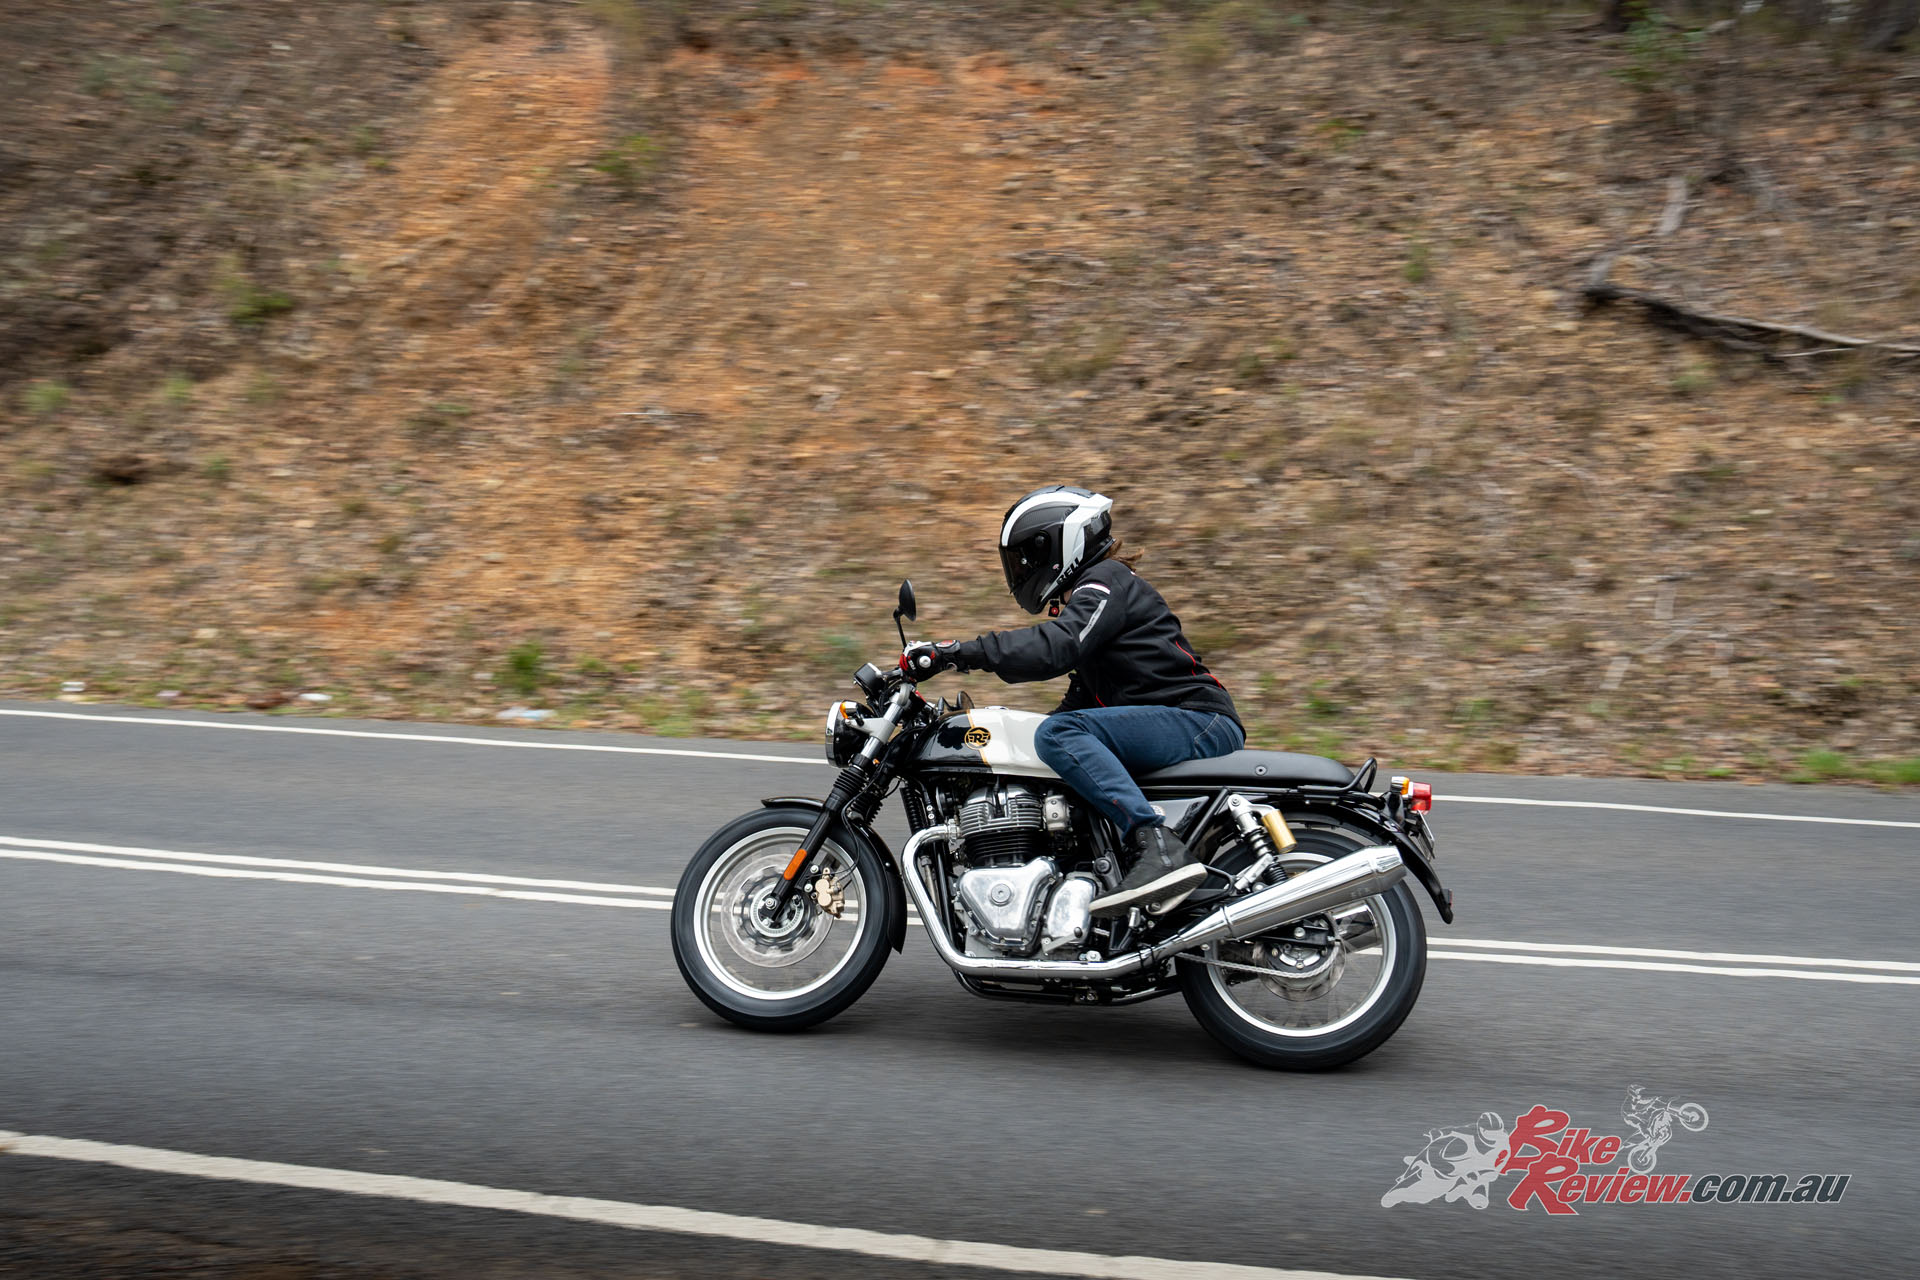 The Continental 650 GT is quite a small bike! Making it accessible for a range of riders.